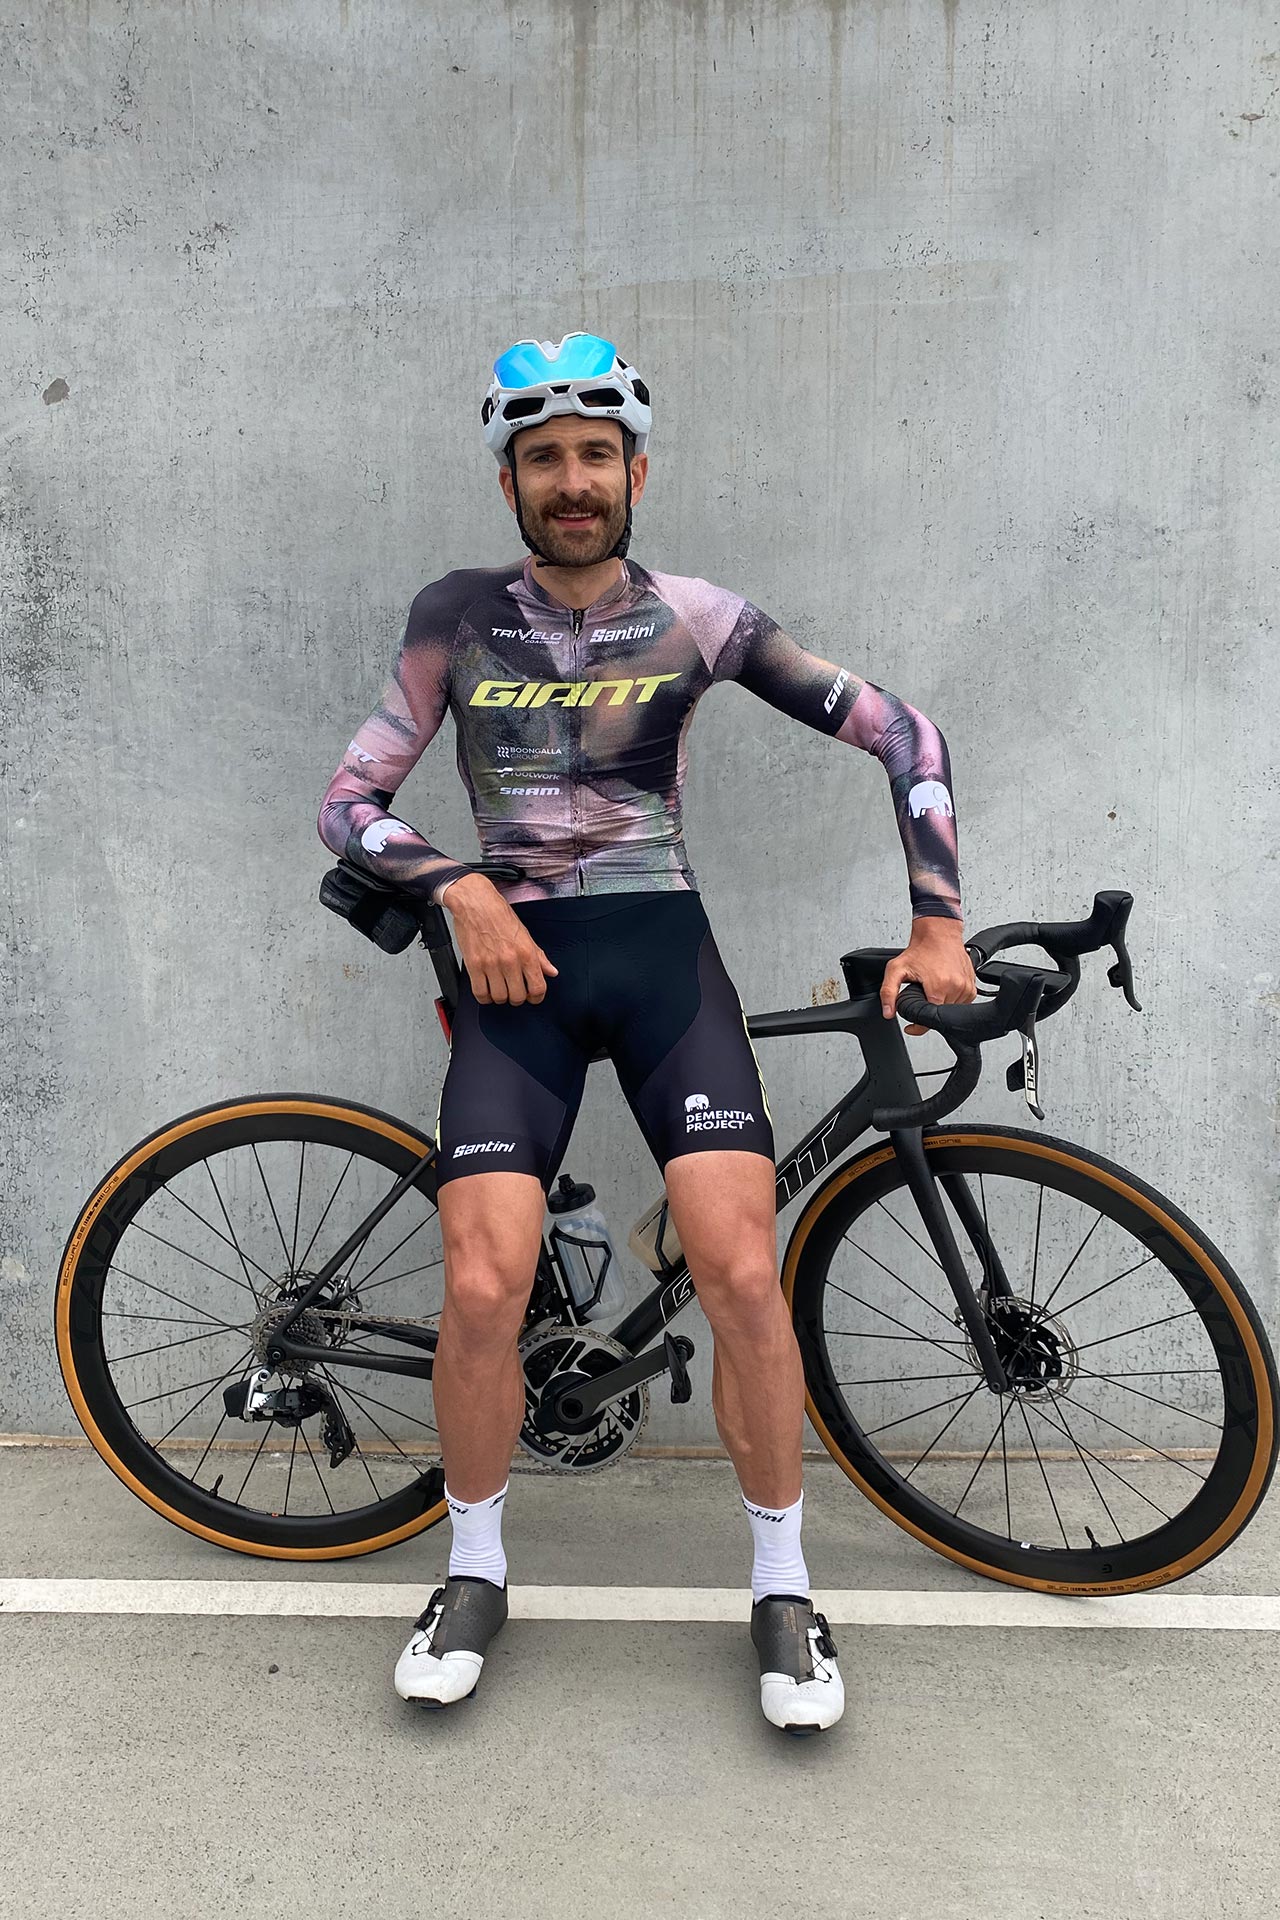 Nick Locandro sits on his bike for a portrait with a concrete background